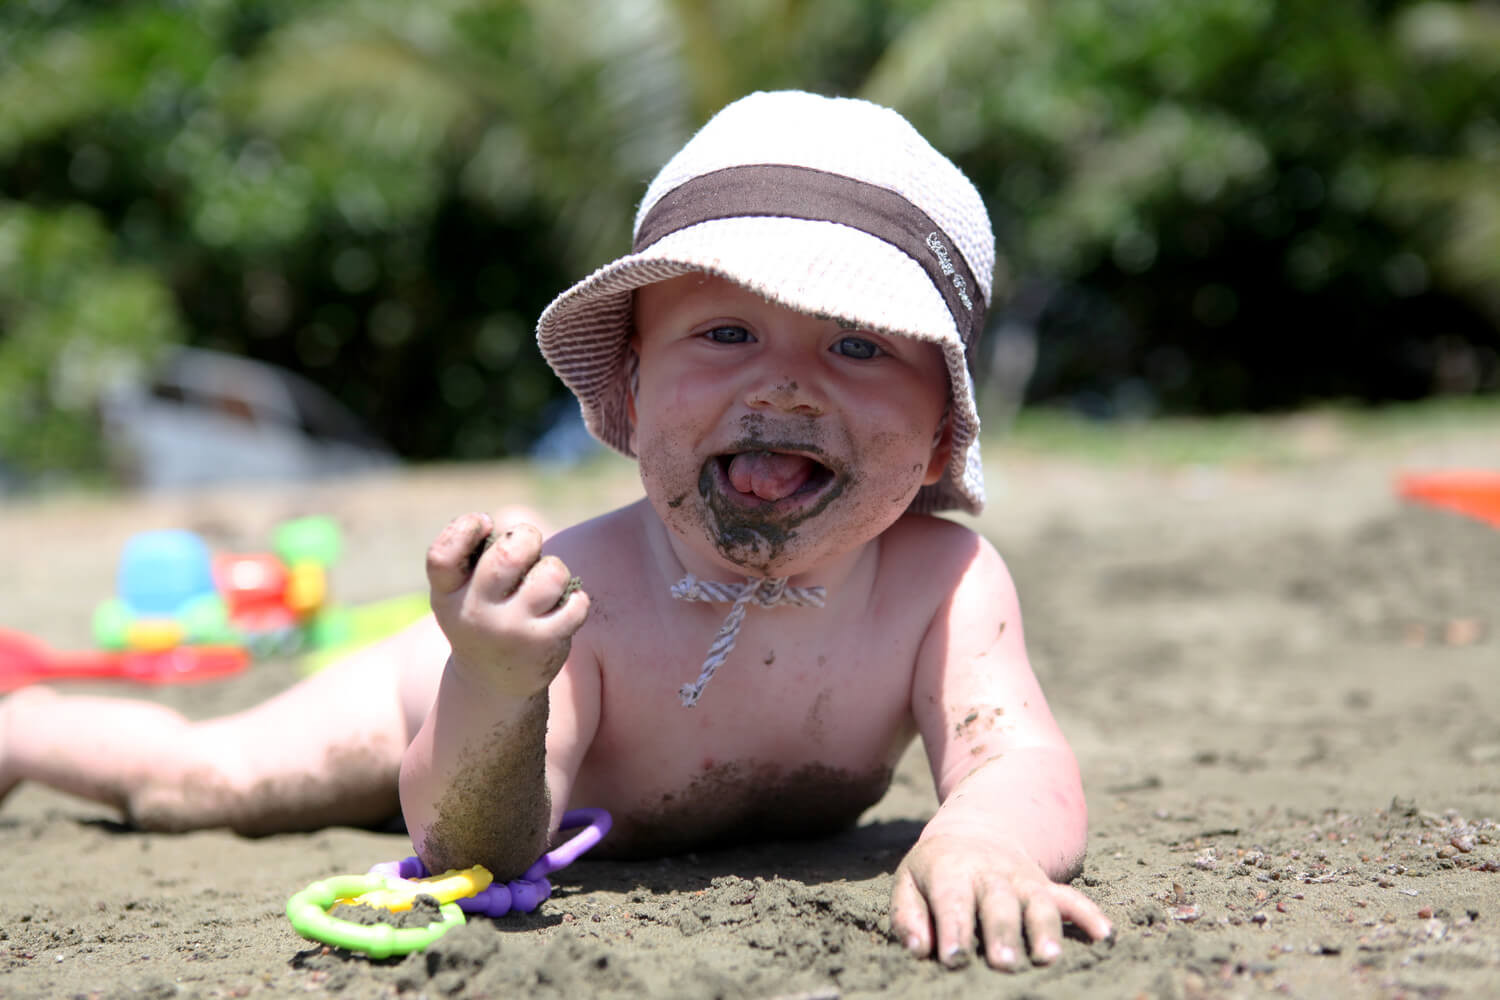 kid eating sand -PICA